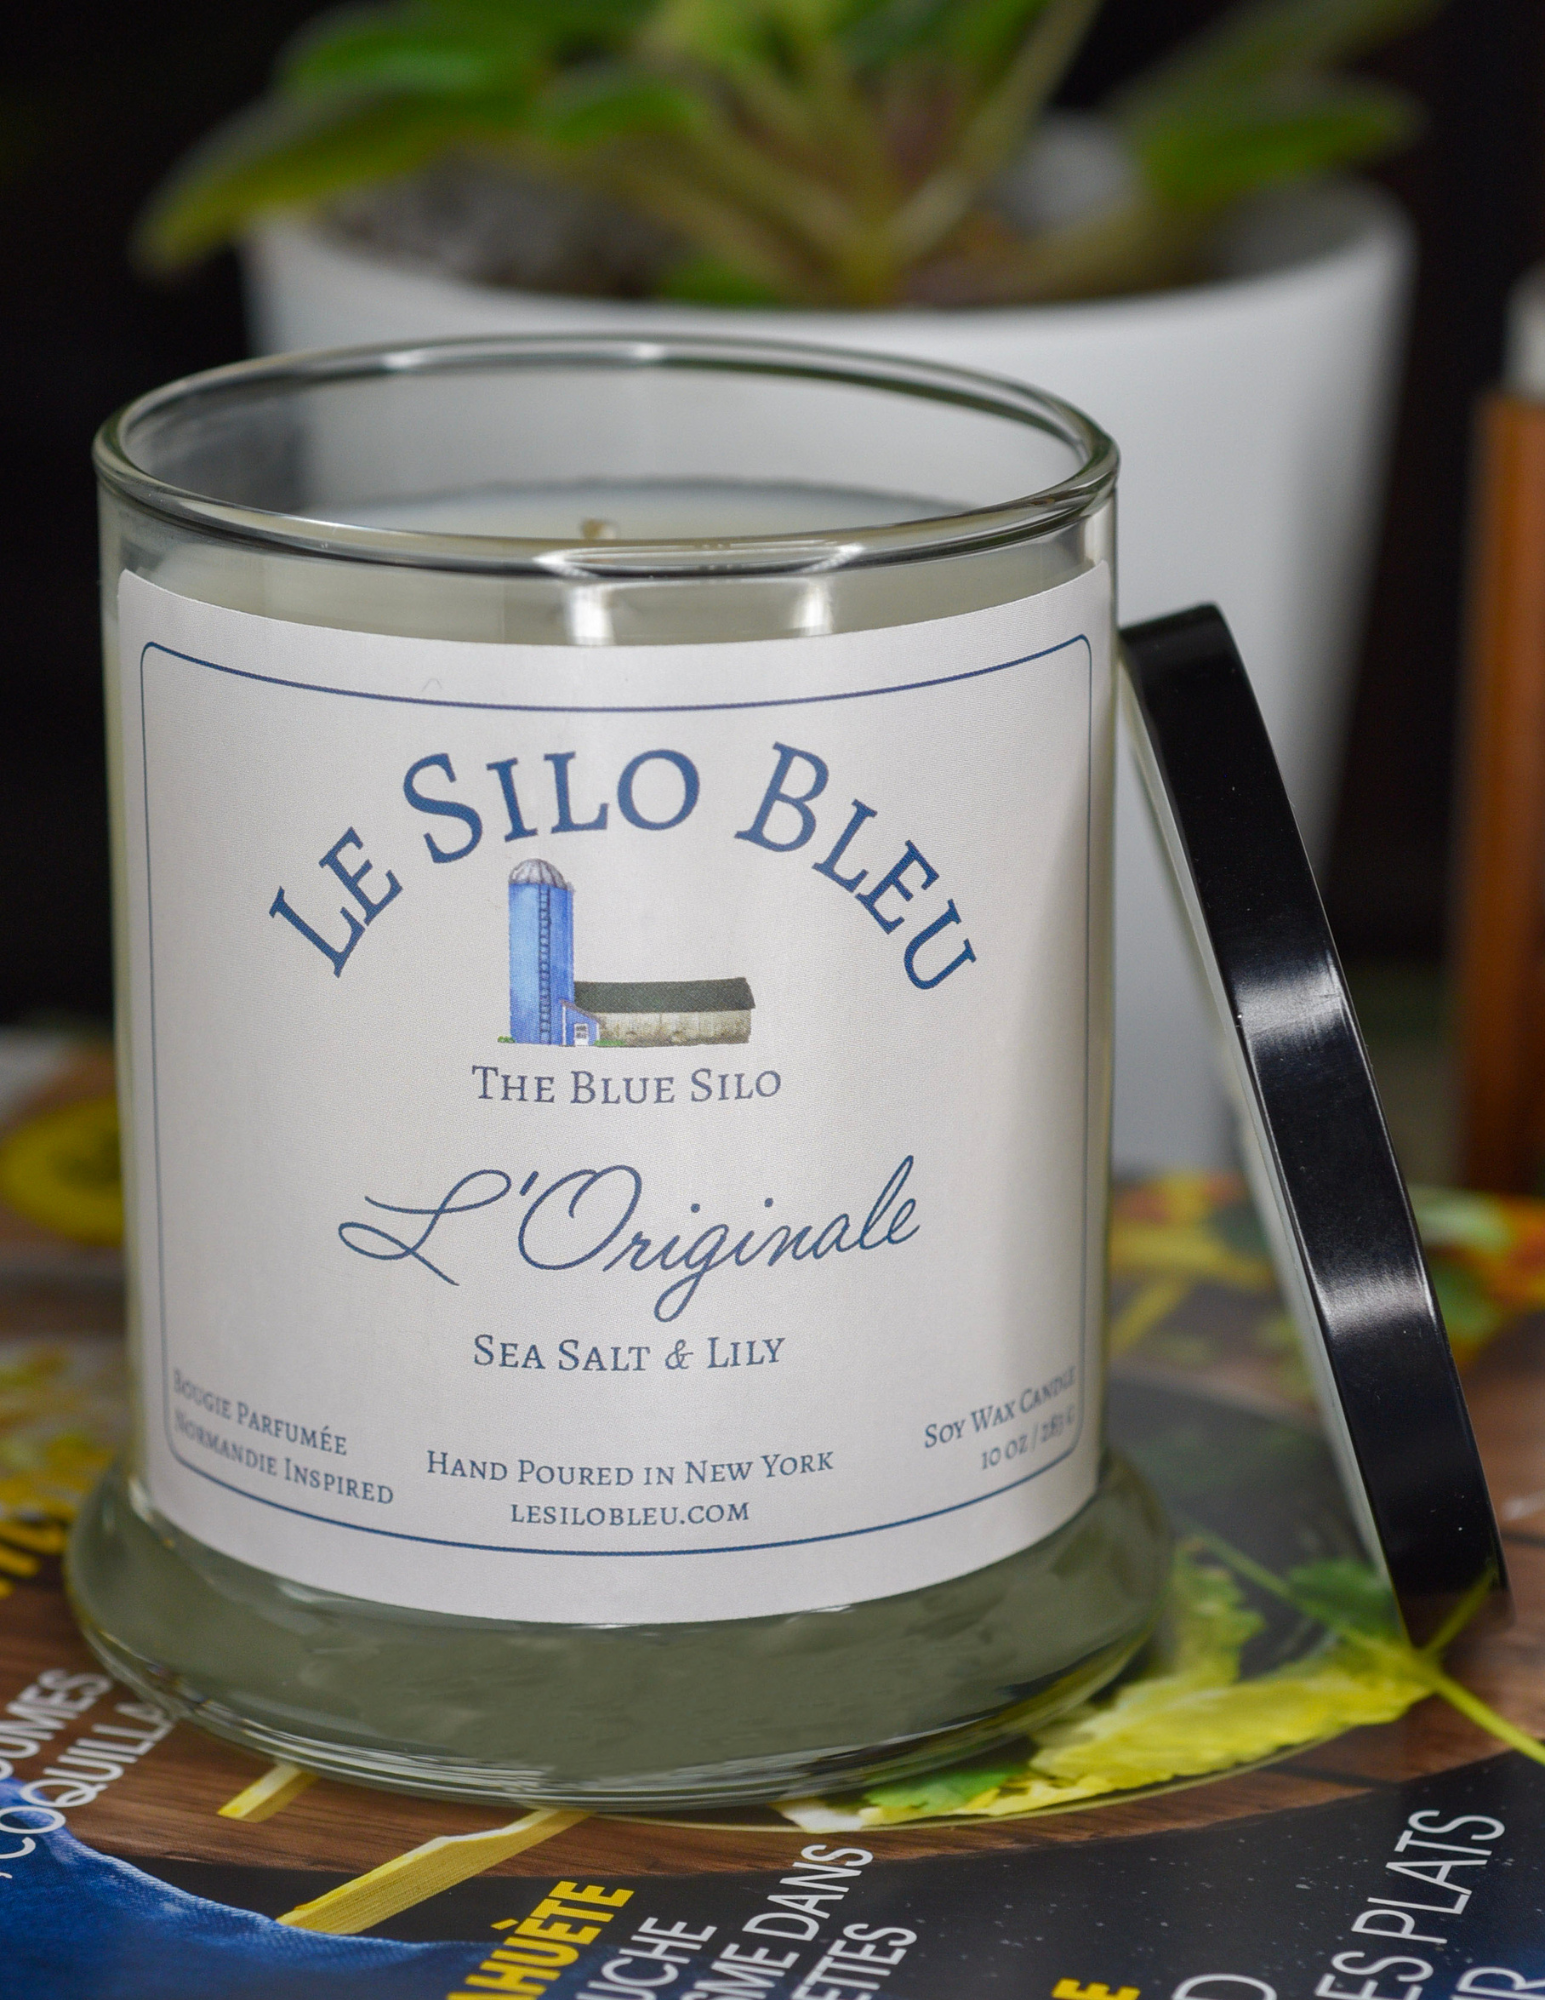 L'Originale - Sea Salt and Lily Scented Soy Wax Candle